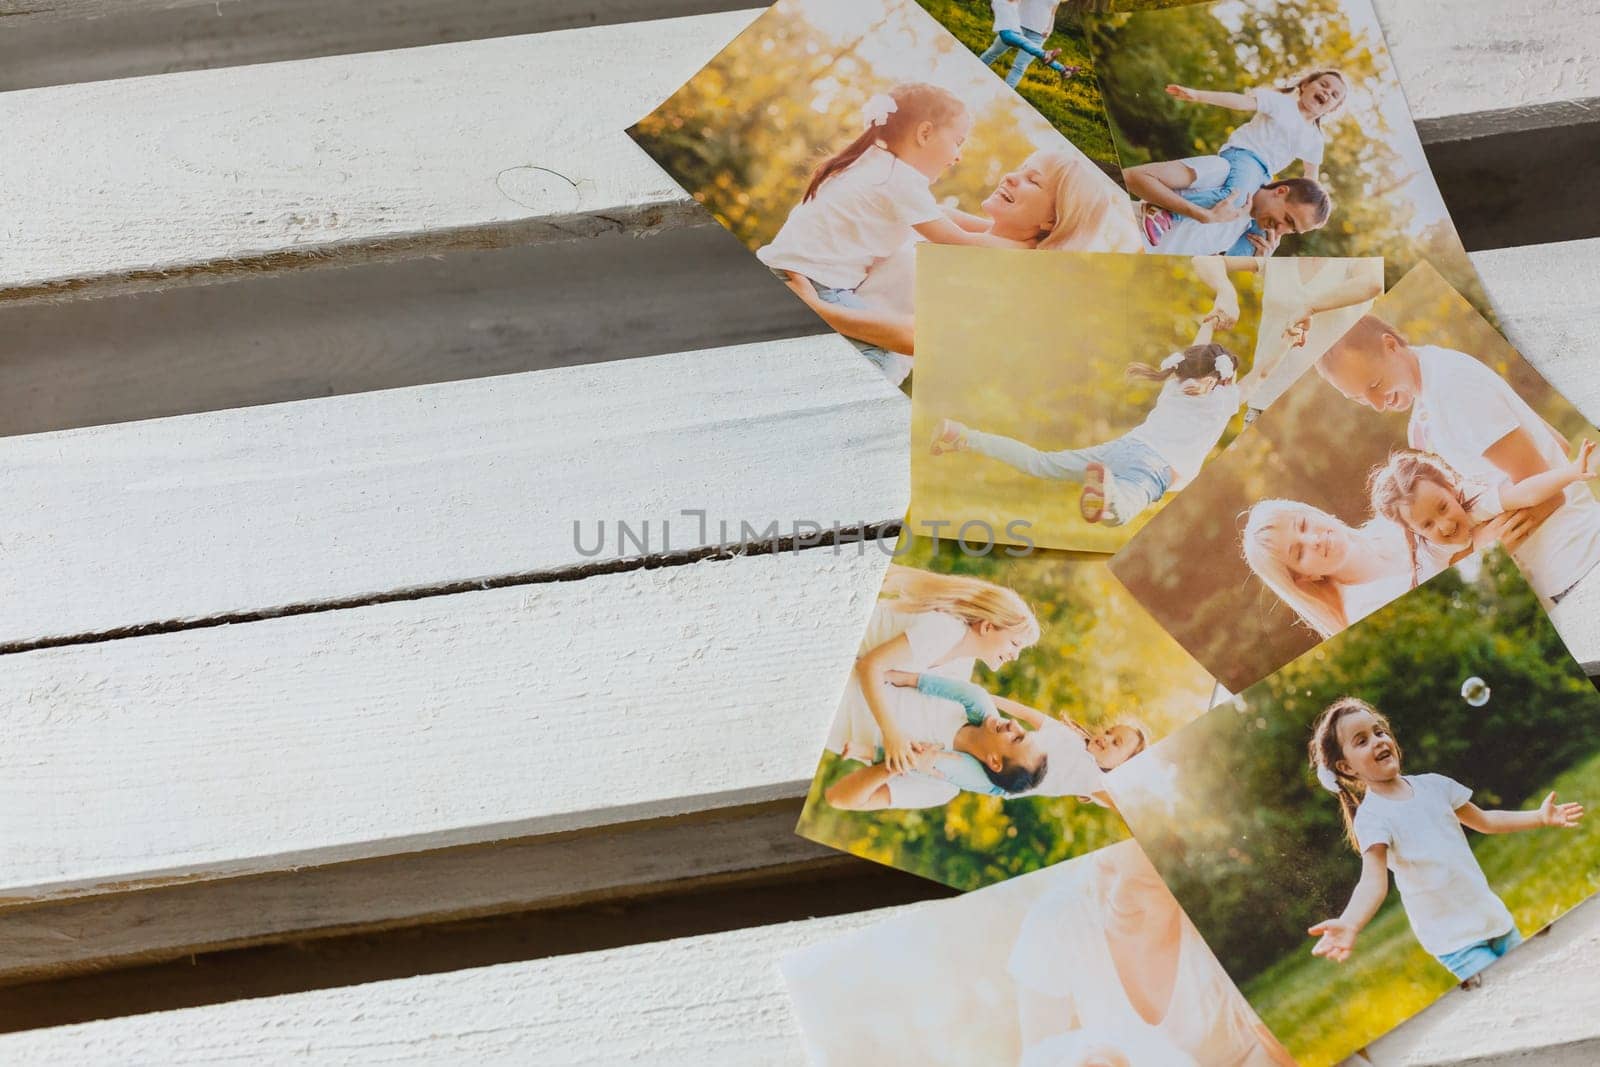 printed photos of family summer vacation lying on desk